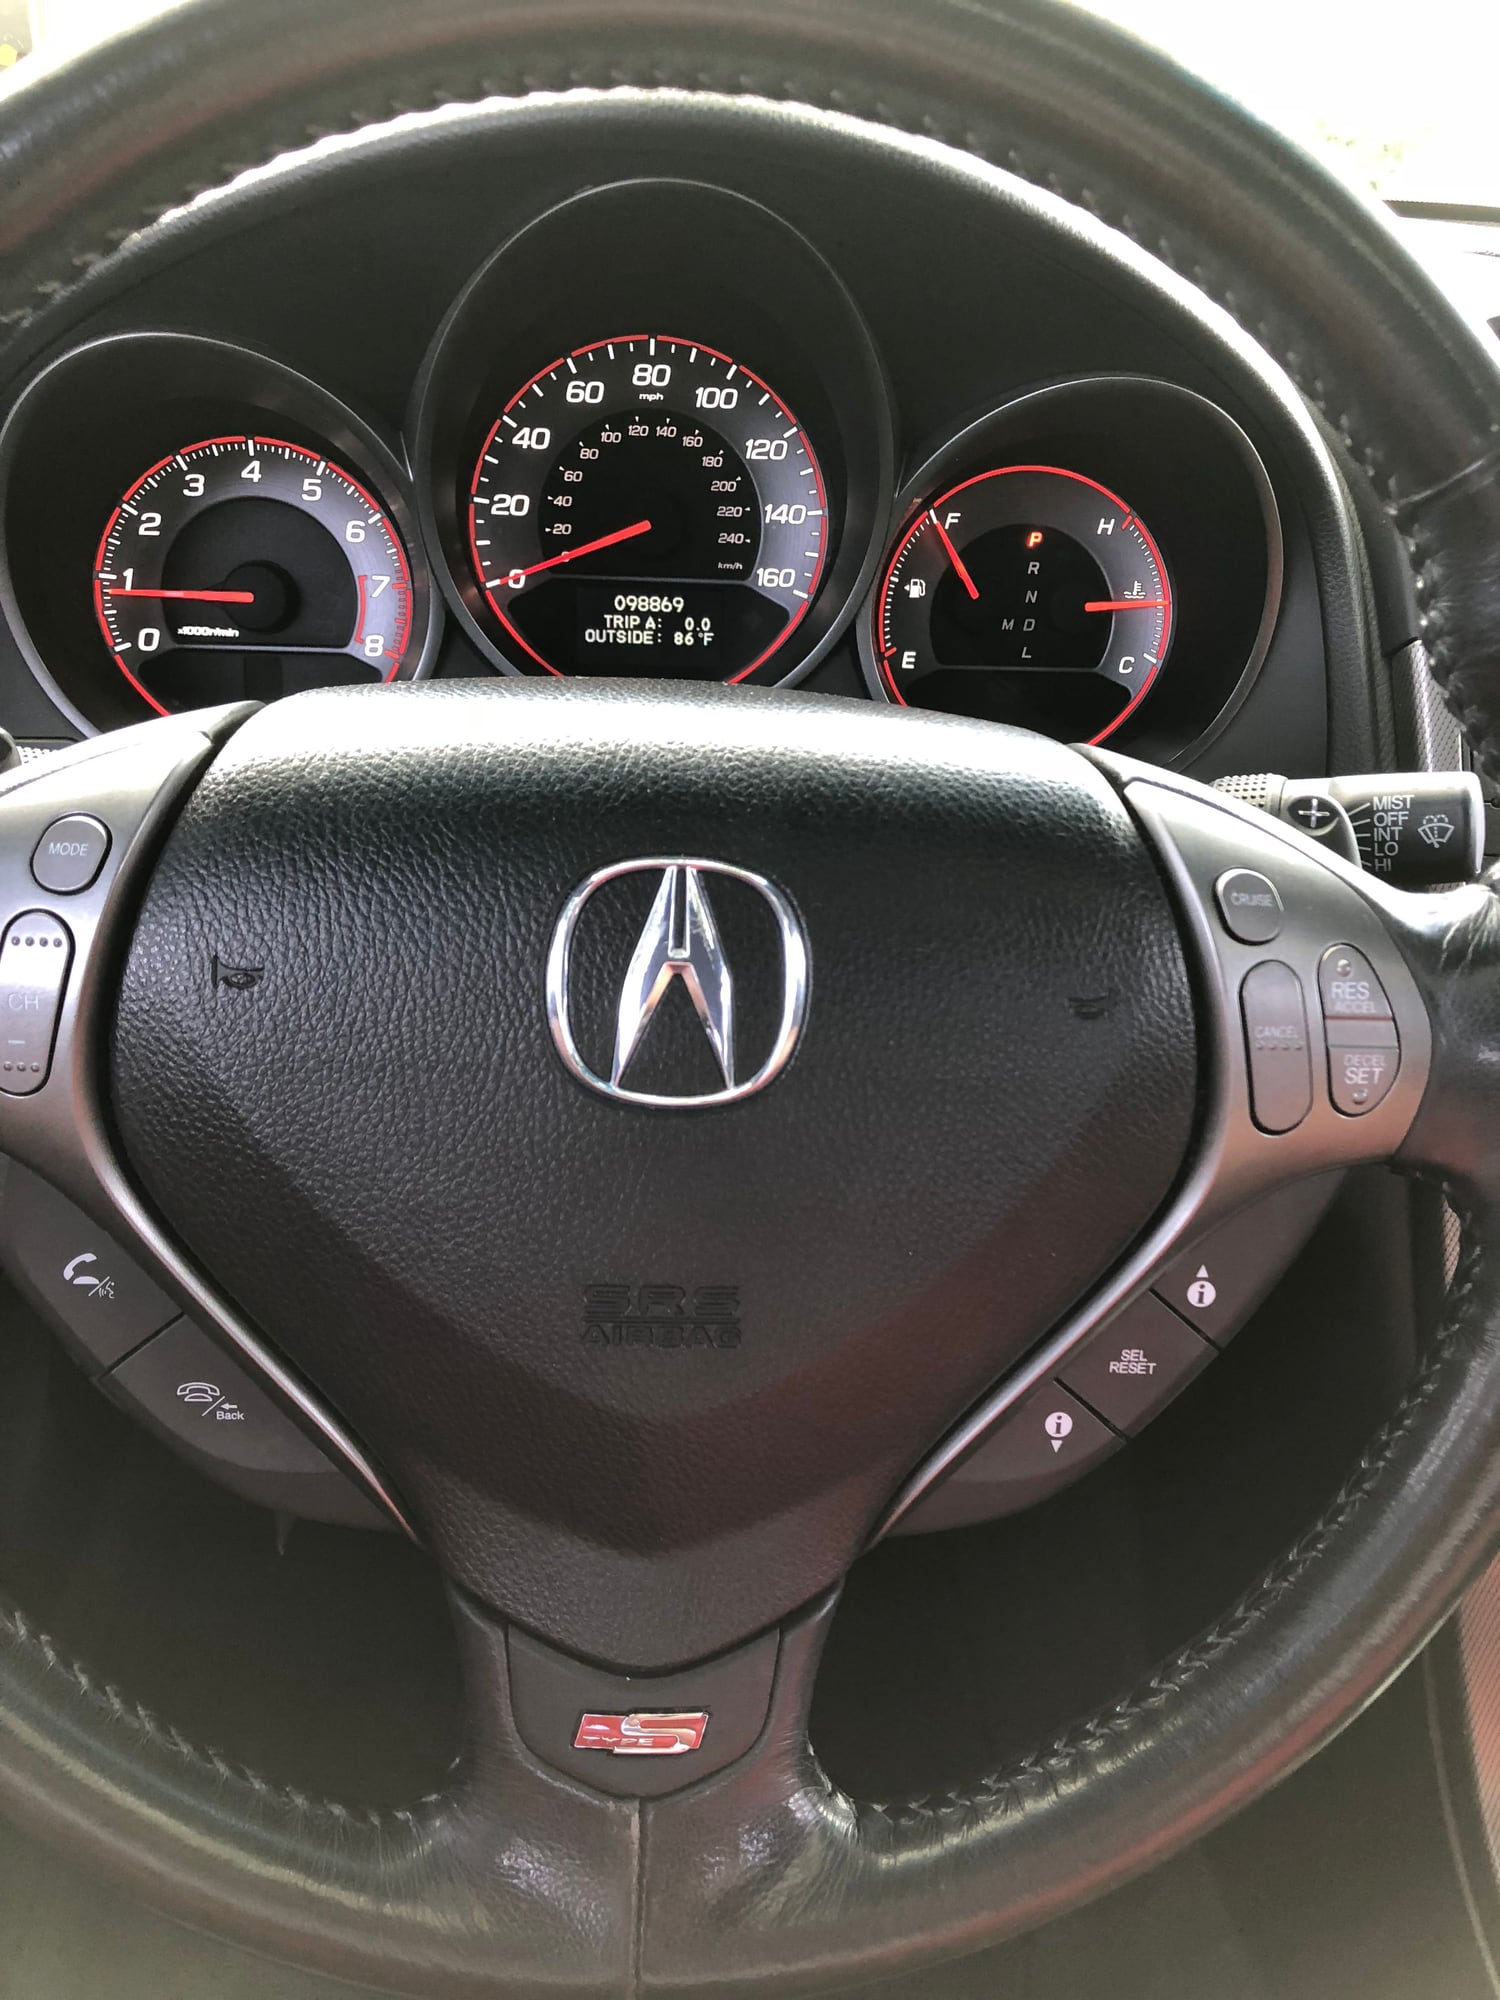 2007 Acura TL - FS: Texas Owned 2007 Acura TL Type S - Used - VIN 19UUA76517A001187 - 98,900 Miles - 6 cyl - 2WD - Automatic - Sedan - Silver - Round Rock, TX 78664, United States